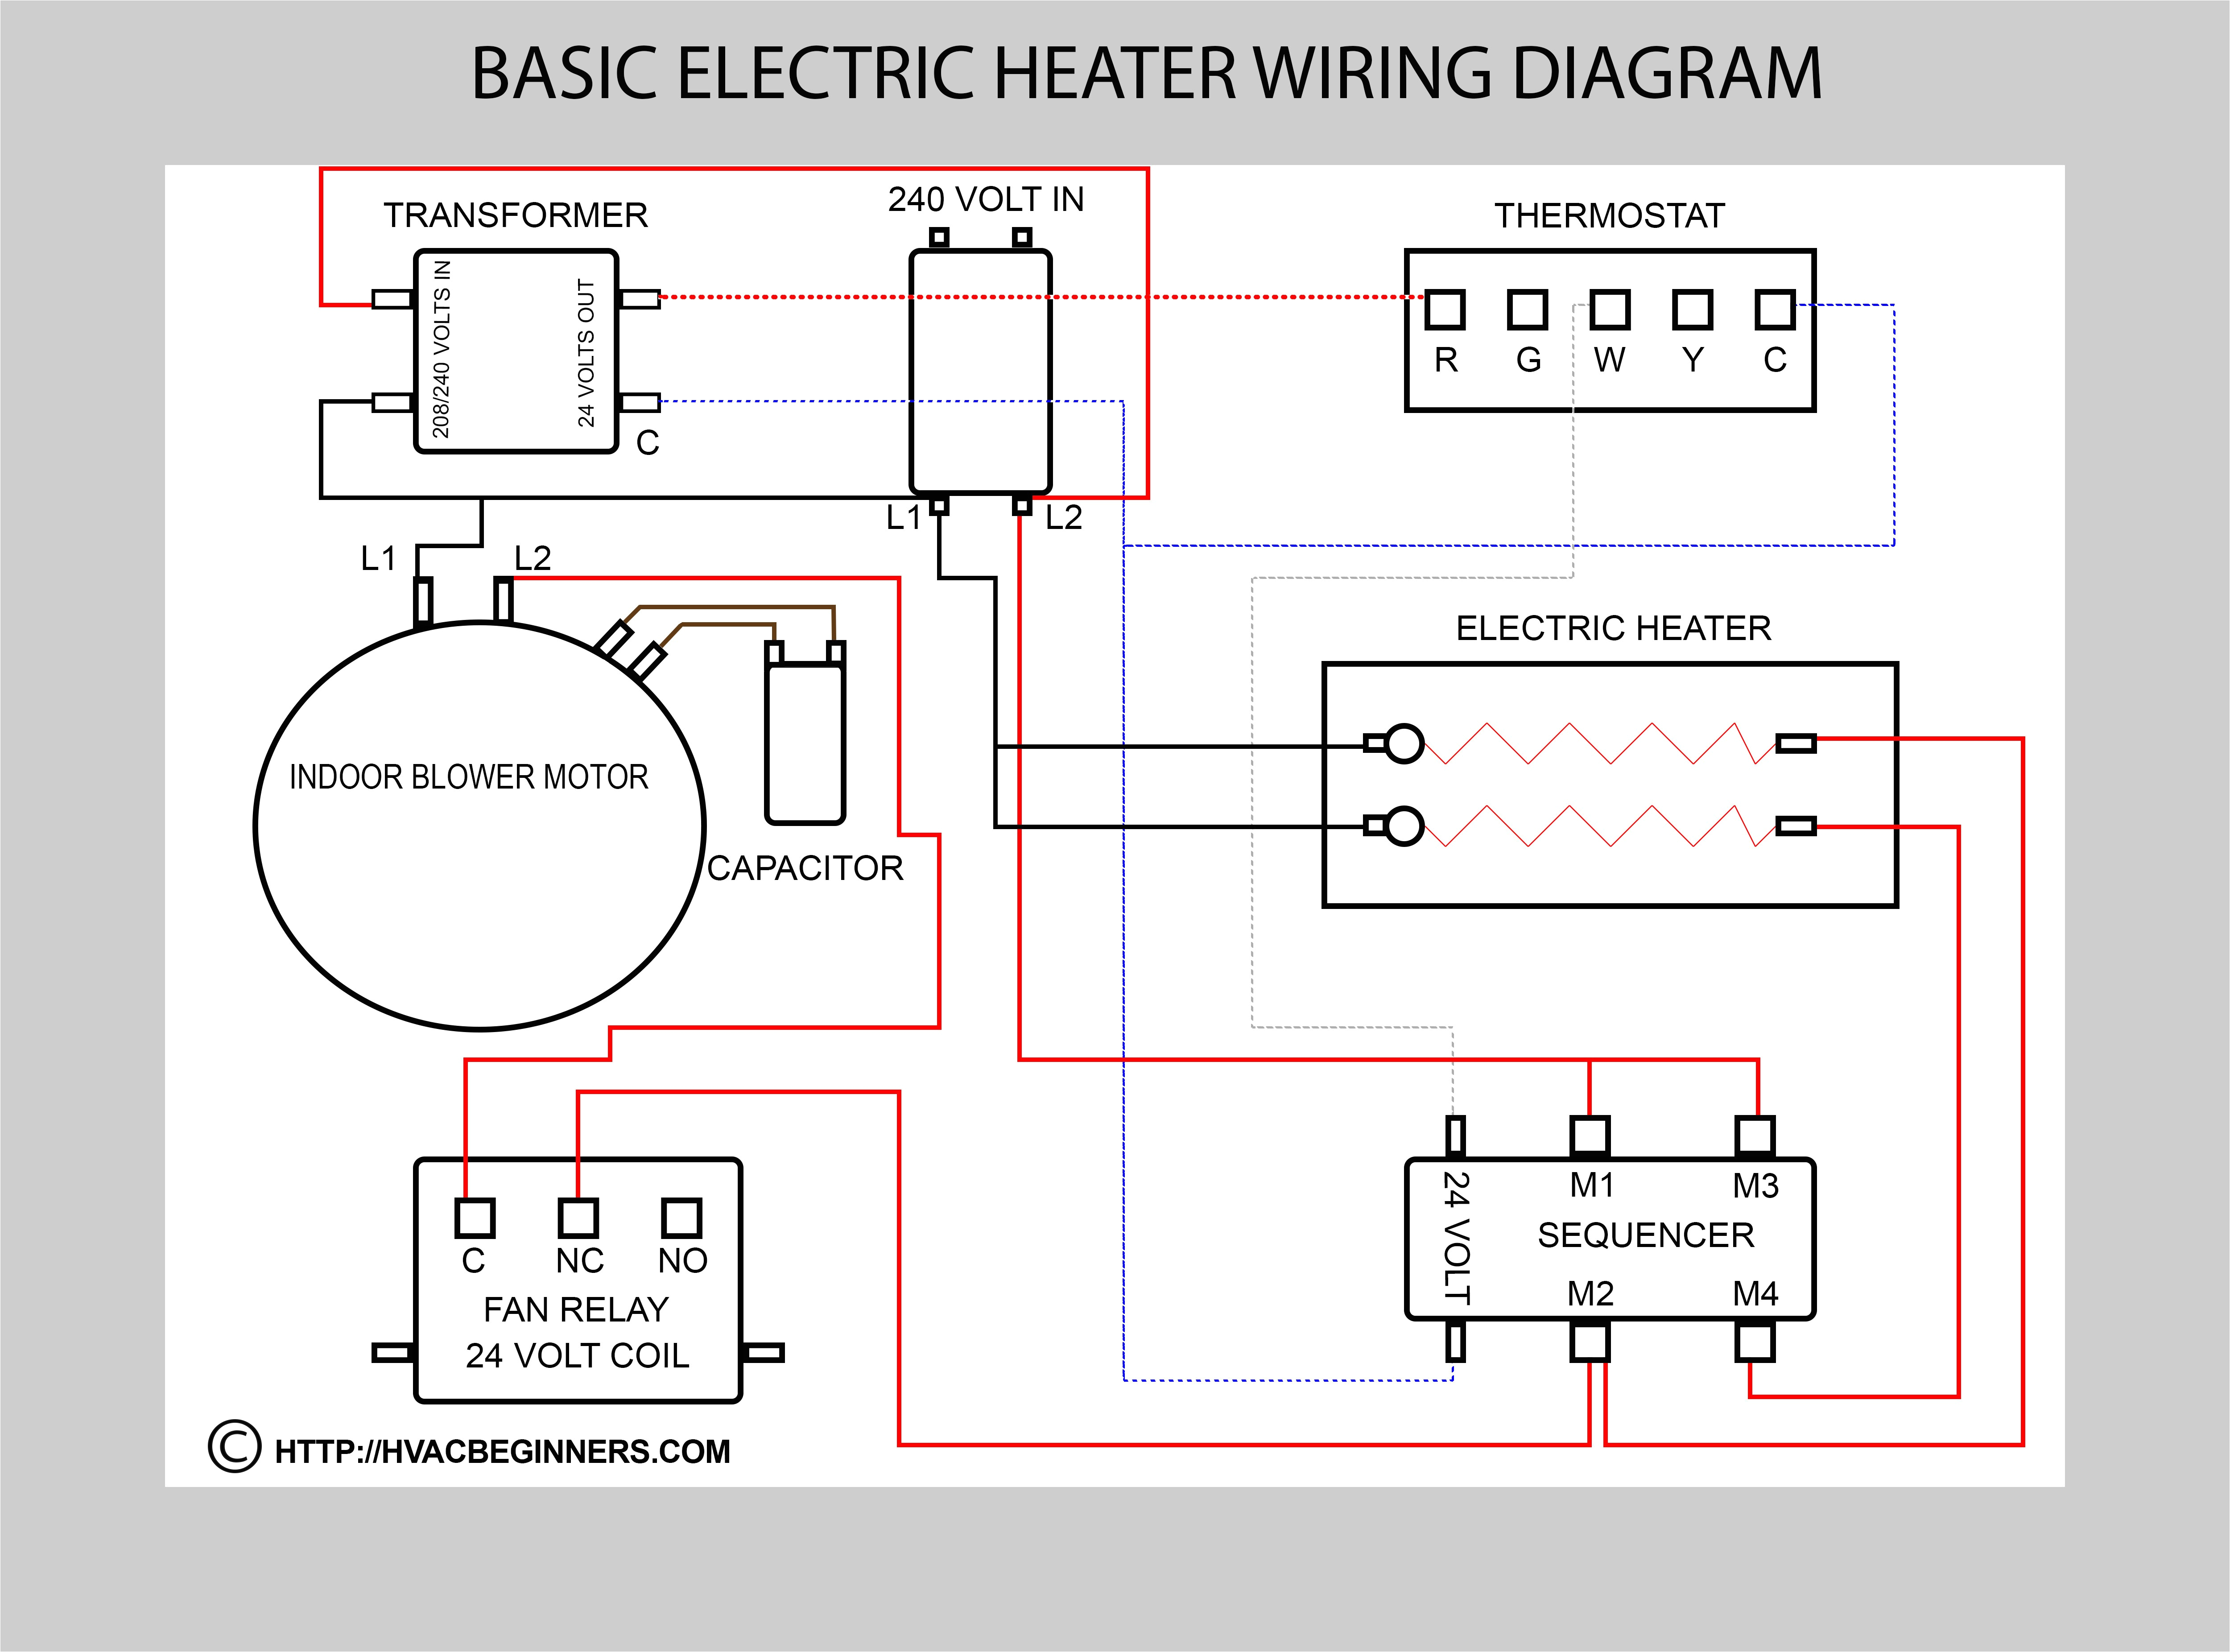 wiring luxaire schematic g8c100120ds11 wiring diagram article review luxaire wiring schematic thermostat home wiring diagrams long